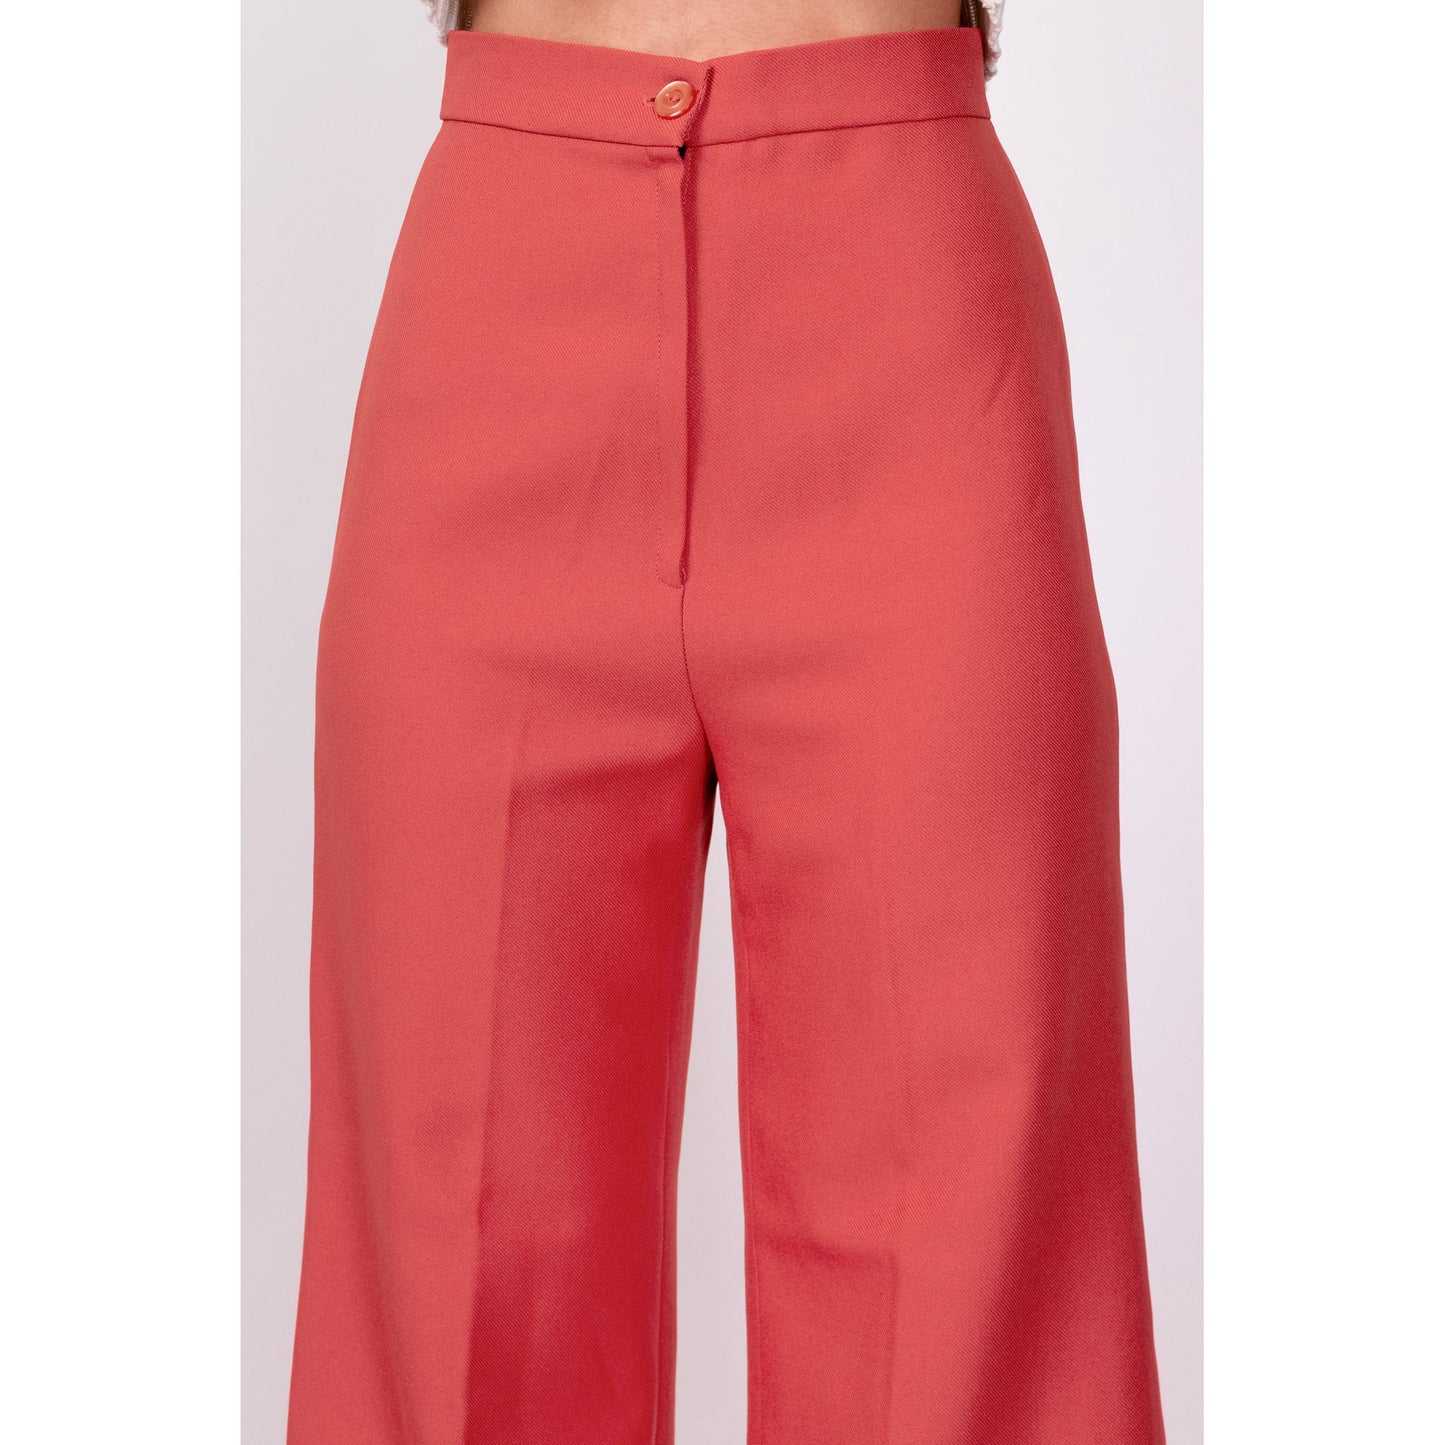 70s Salmon Pink High Waisted Flared Pants - Extra Small, 23.5" 